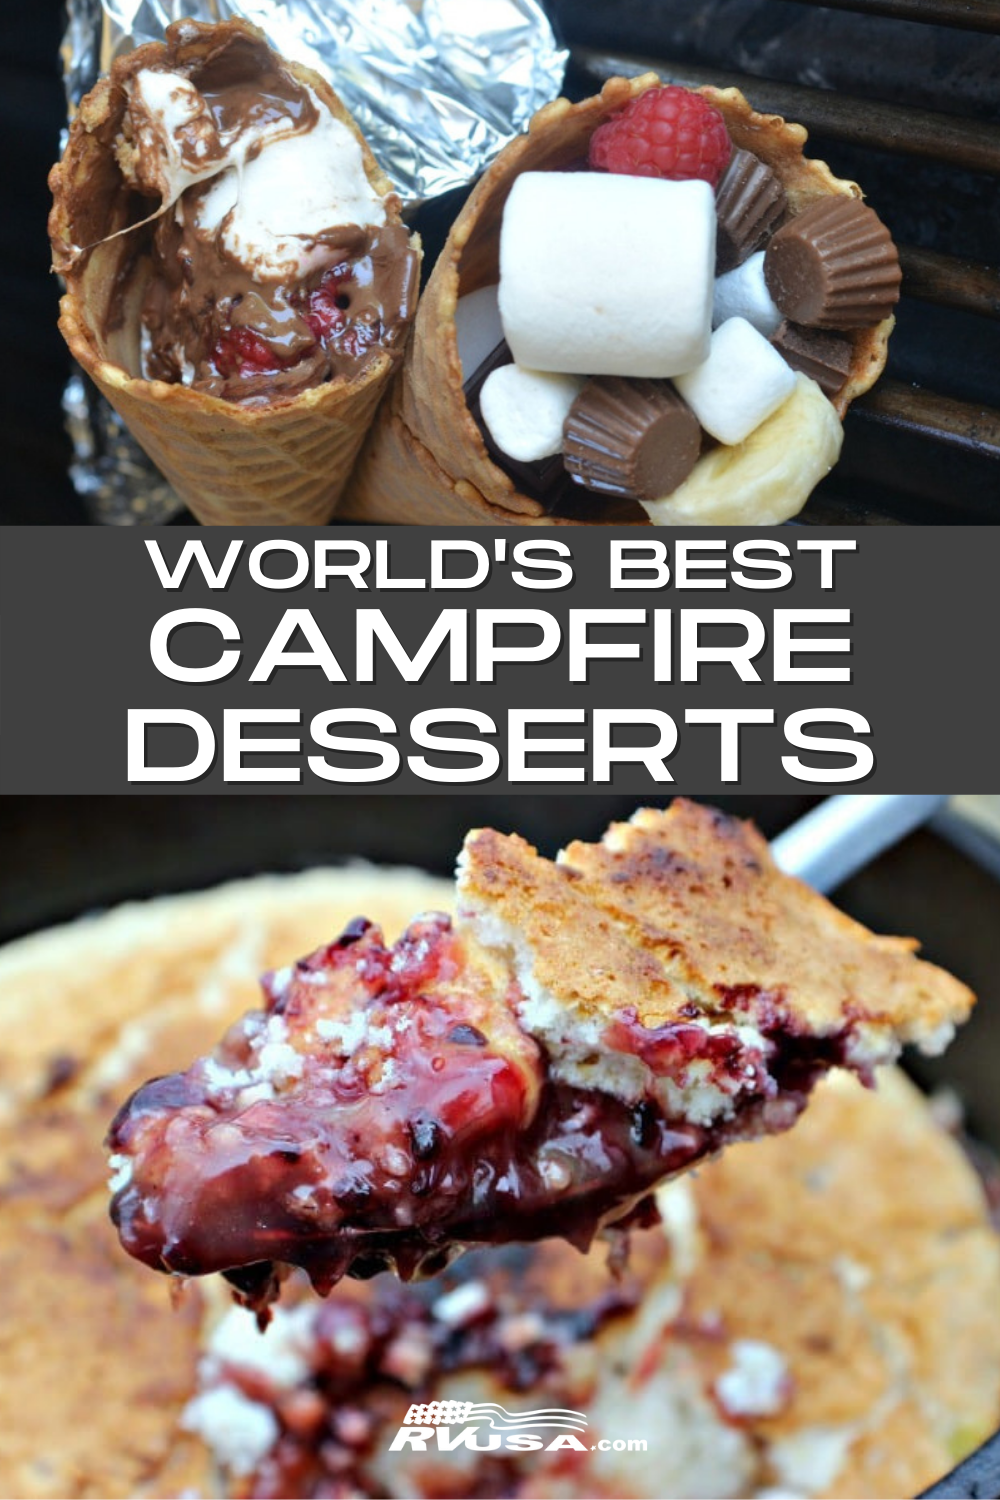 Campfire s'mores cones and campfire cobbler. Text reads "World's best campfire desserts"